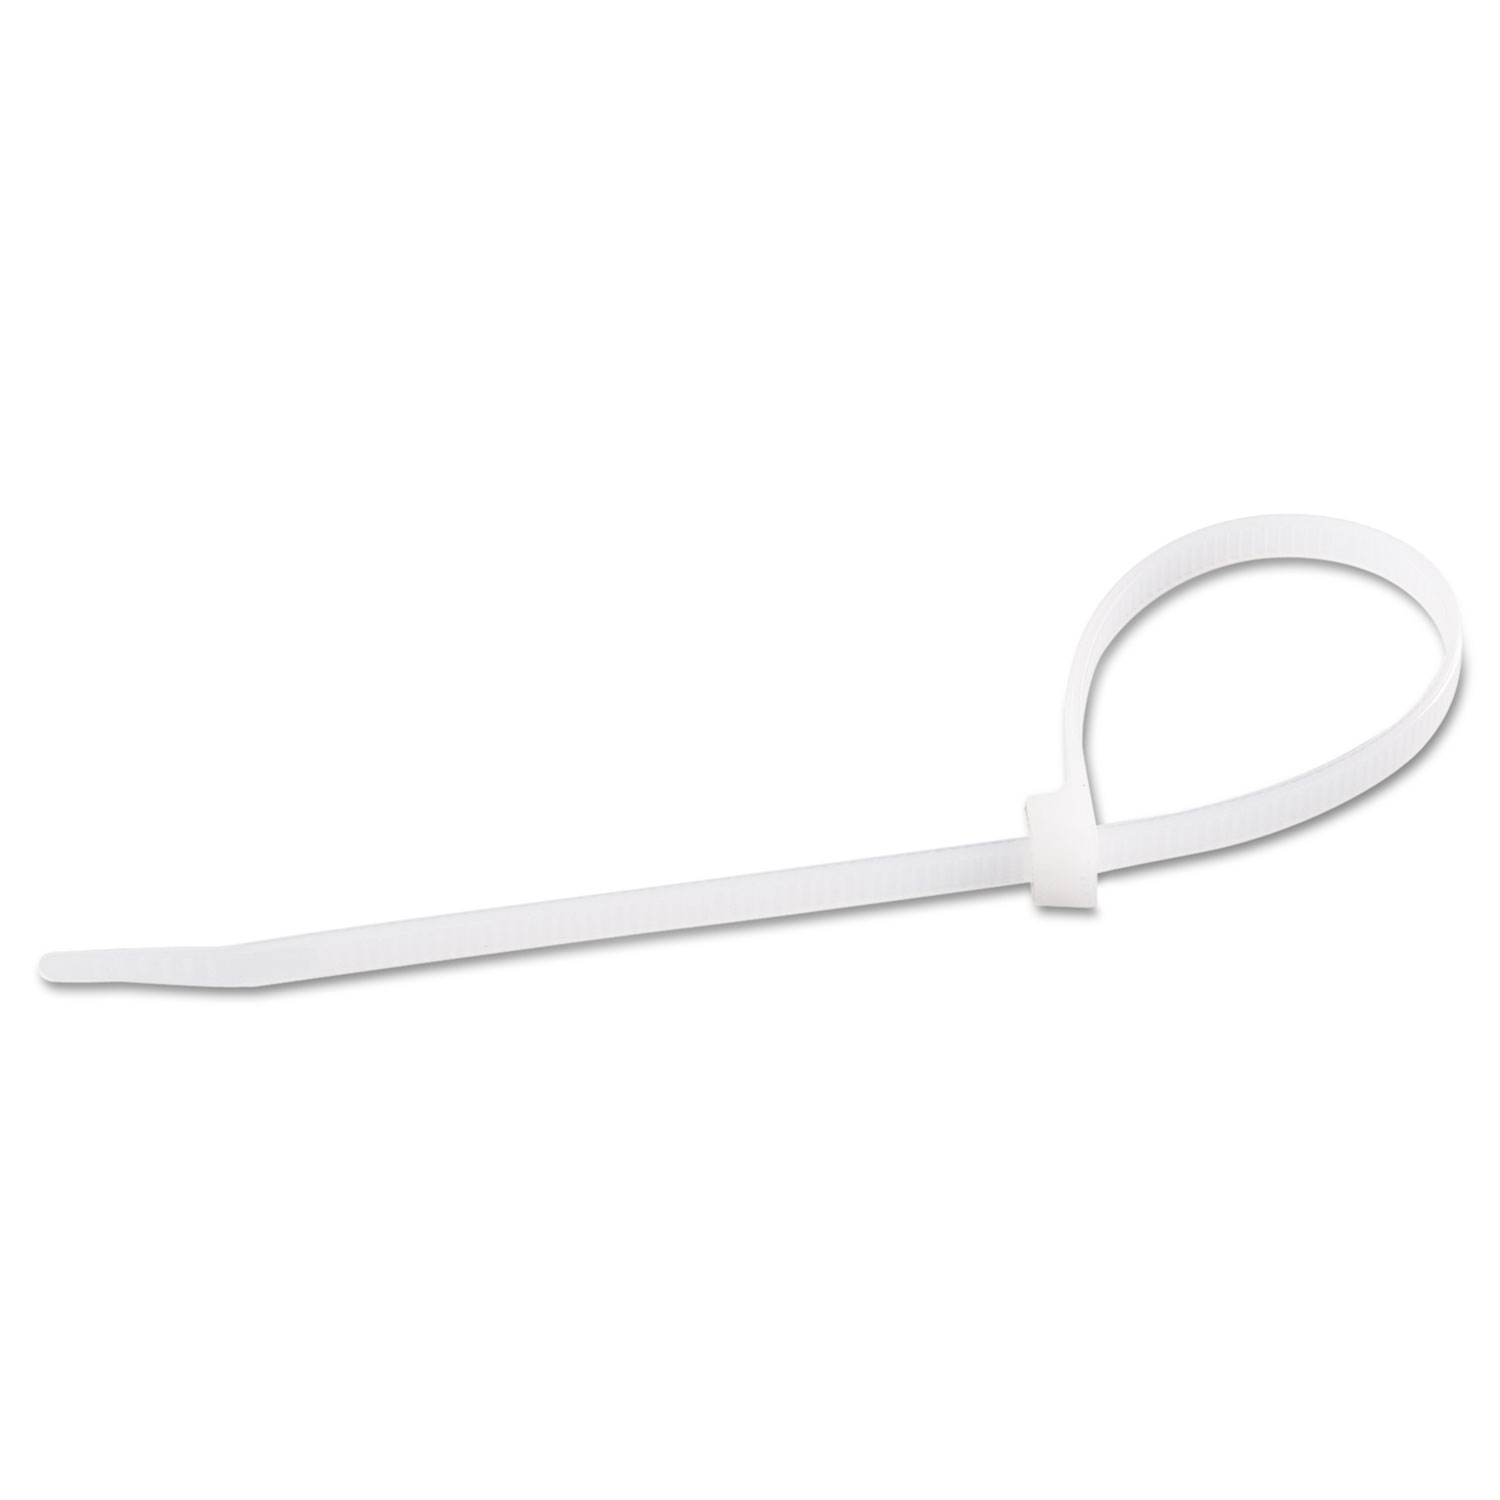 Cable Ties, 8, 75 lb, White, 100/Pack